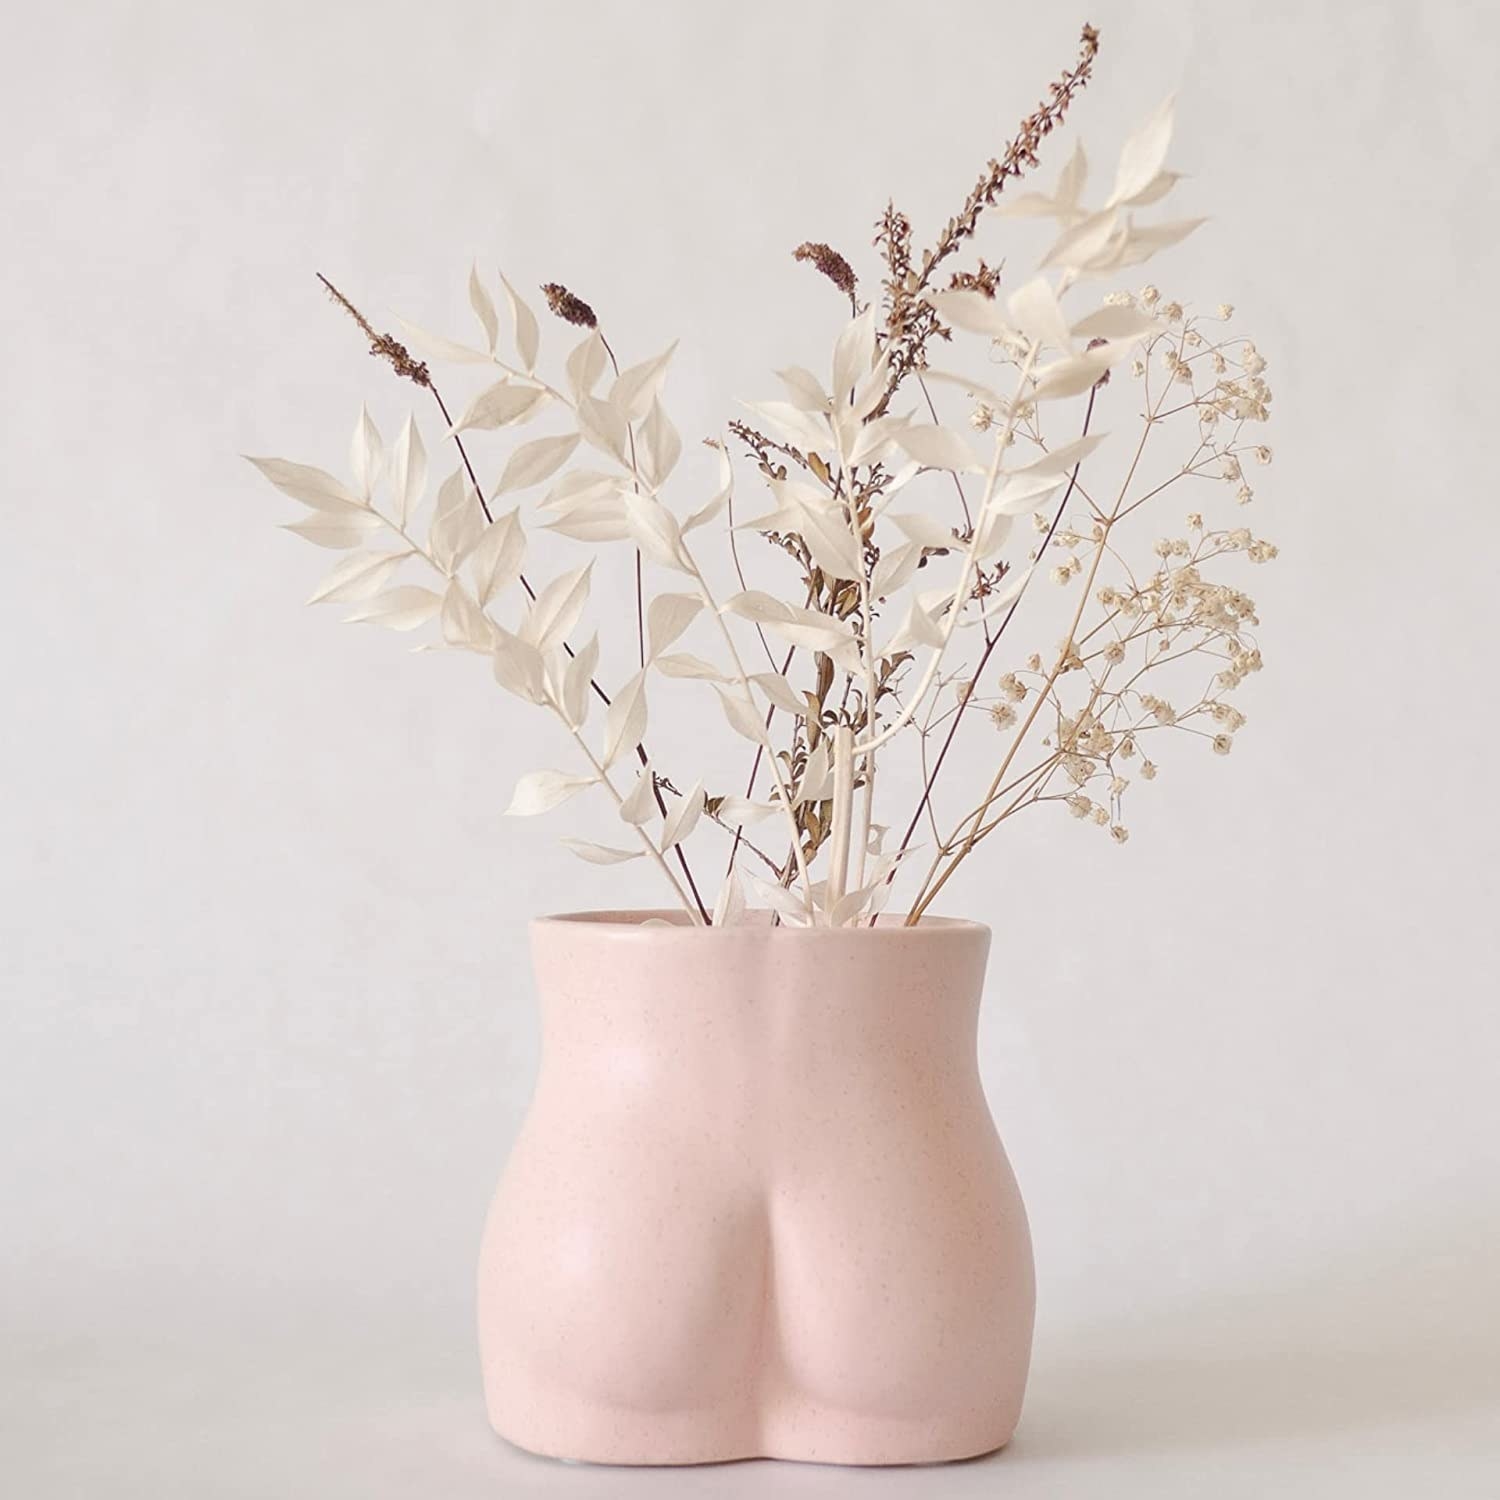 The butt-shaped vase holding some dried flowers in front of a plain background